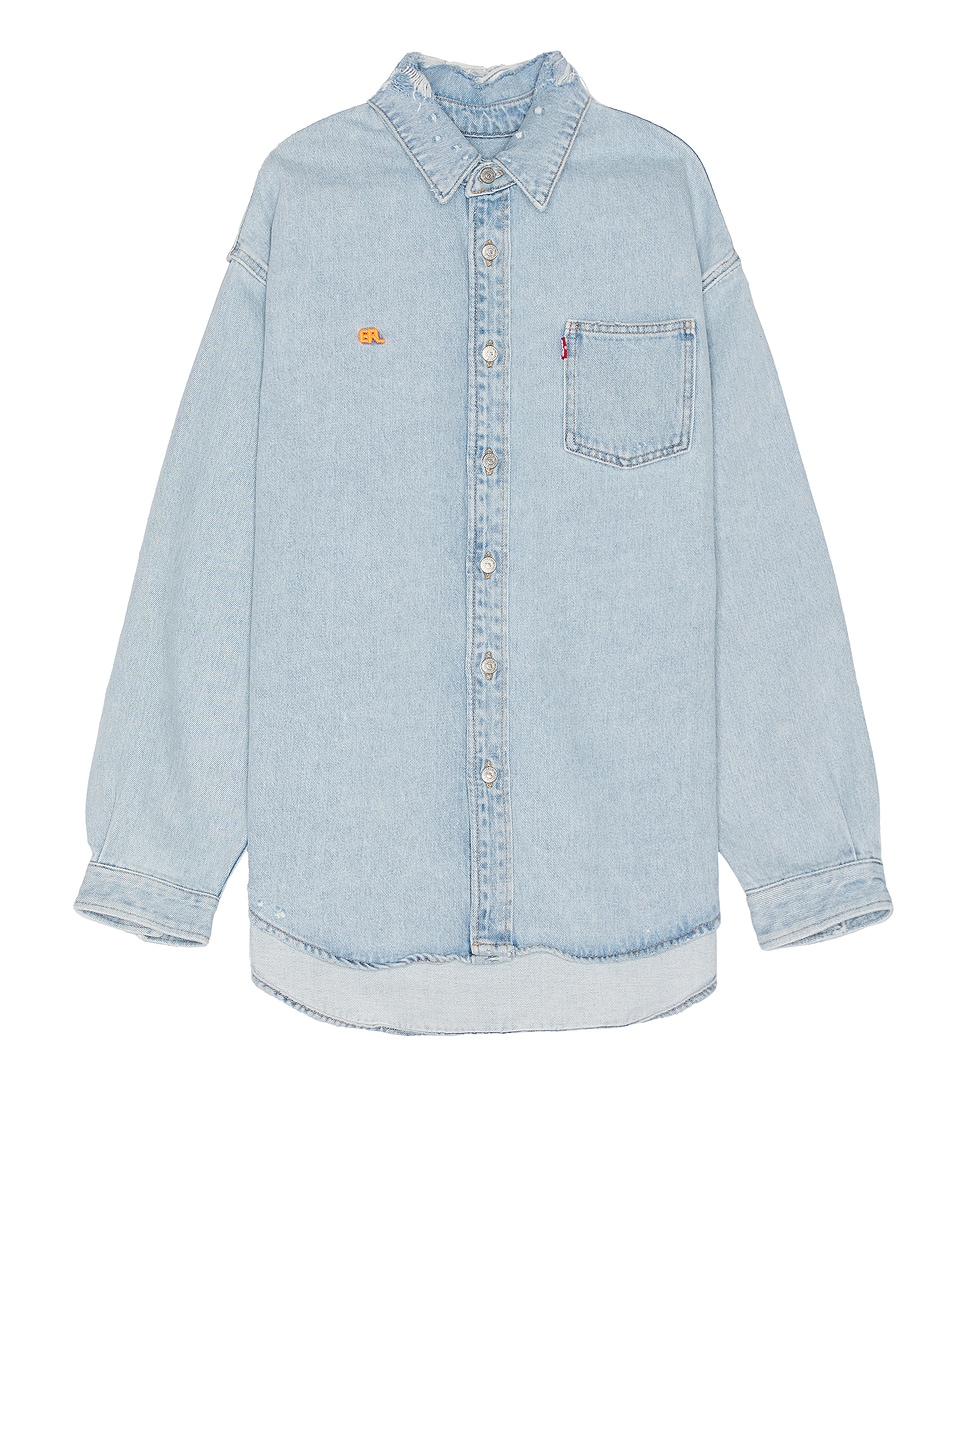 Image 1 of ERL Unisex Levis Overshirt Woven in Blue